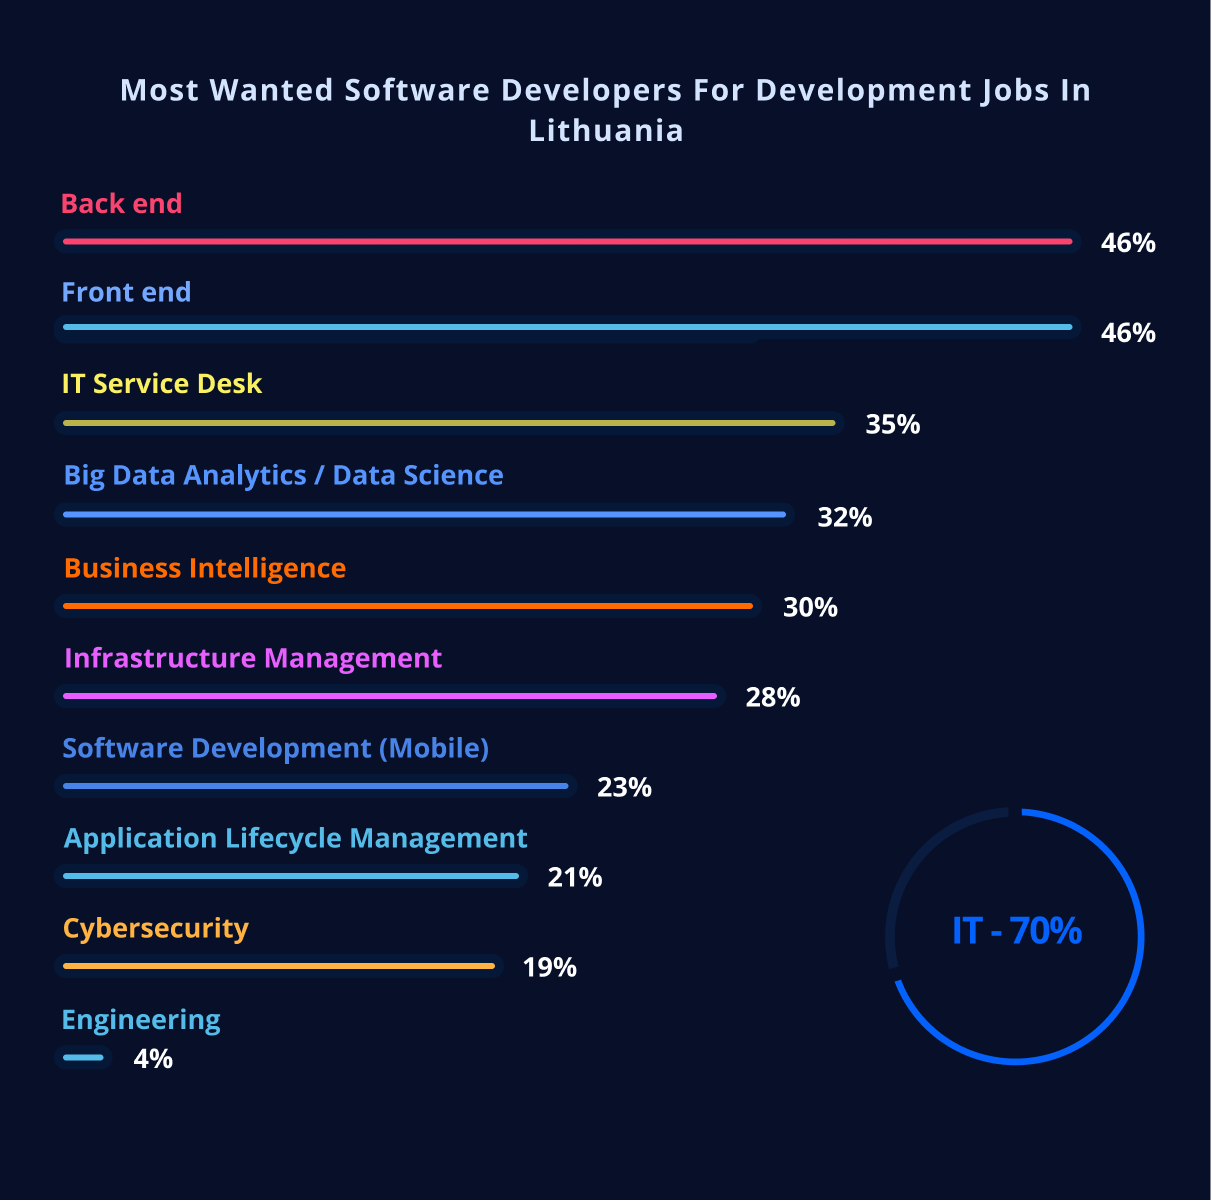 Most wanted software developers for development jobs in Lithuania